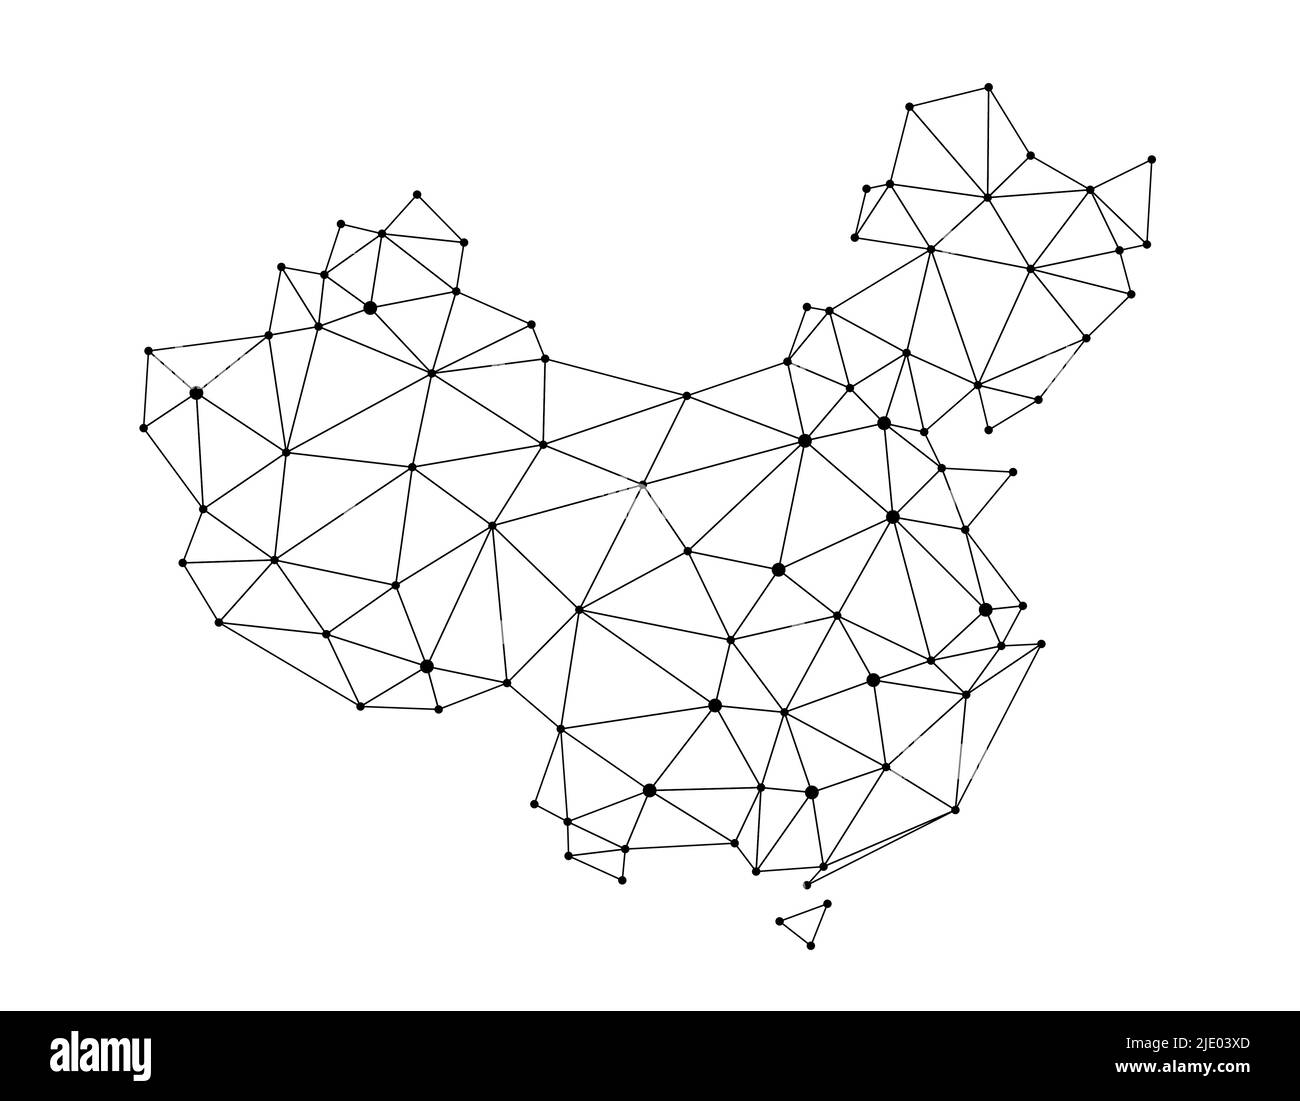 China polygonal map. Abstract geometric connected dots vector map. Low poly style. Stock Vector